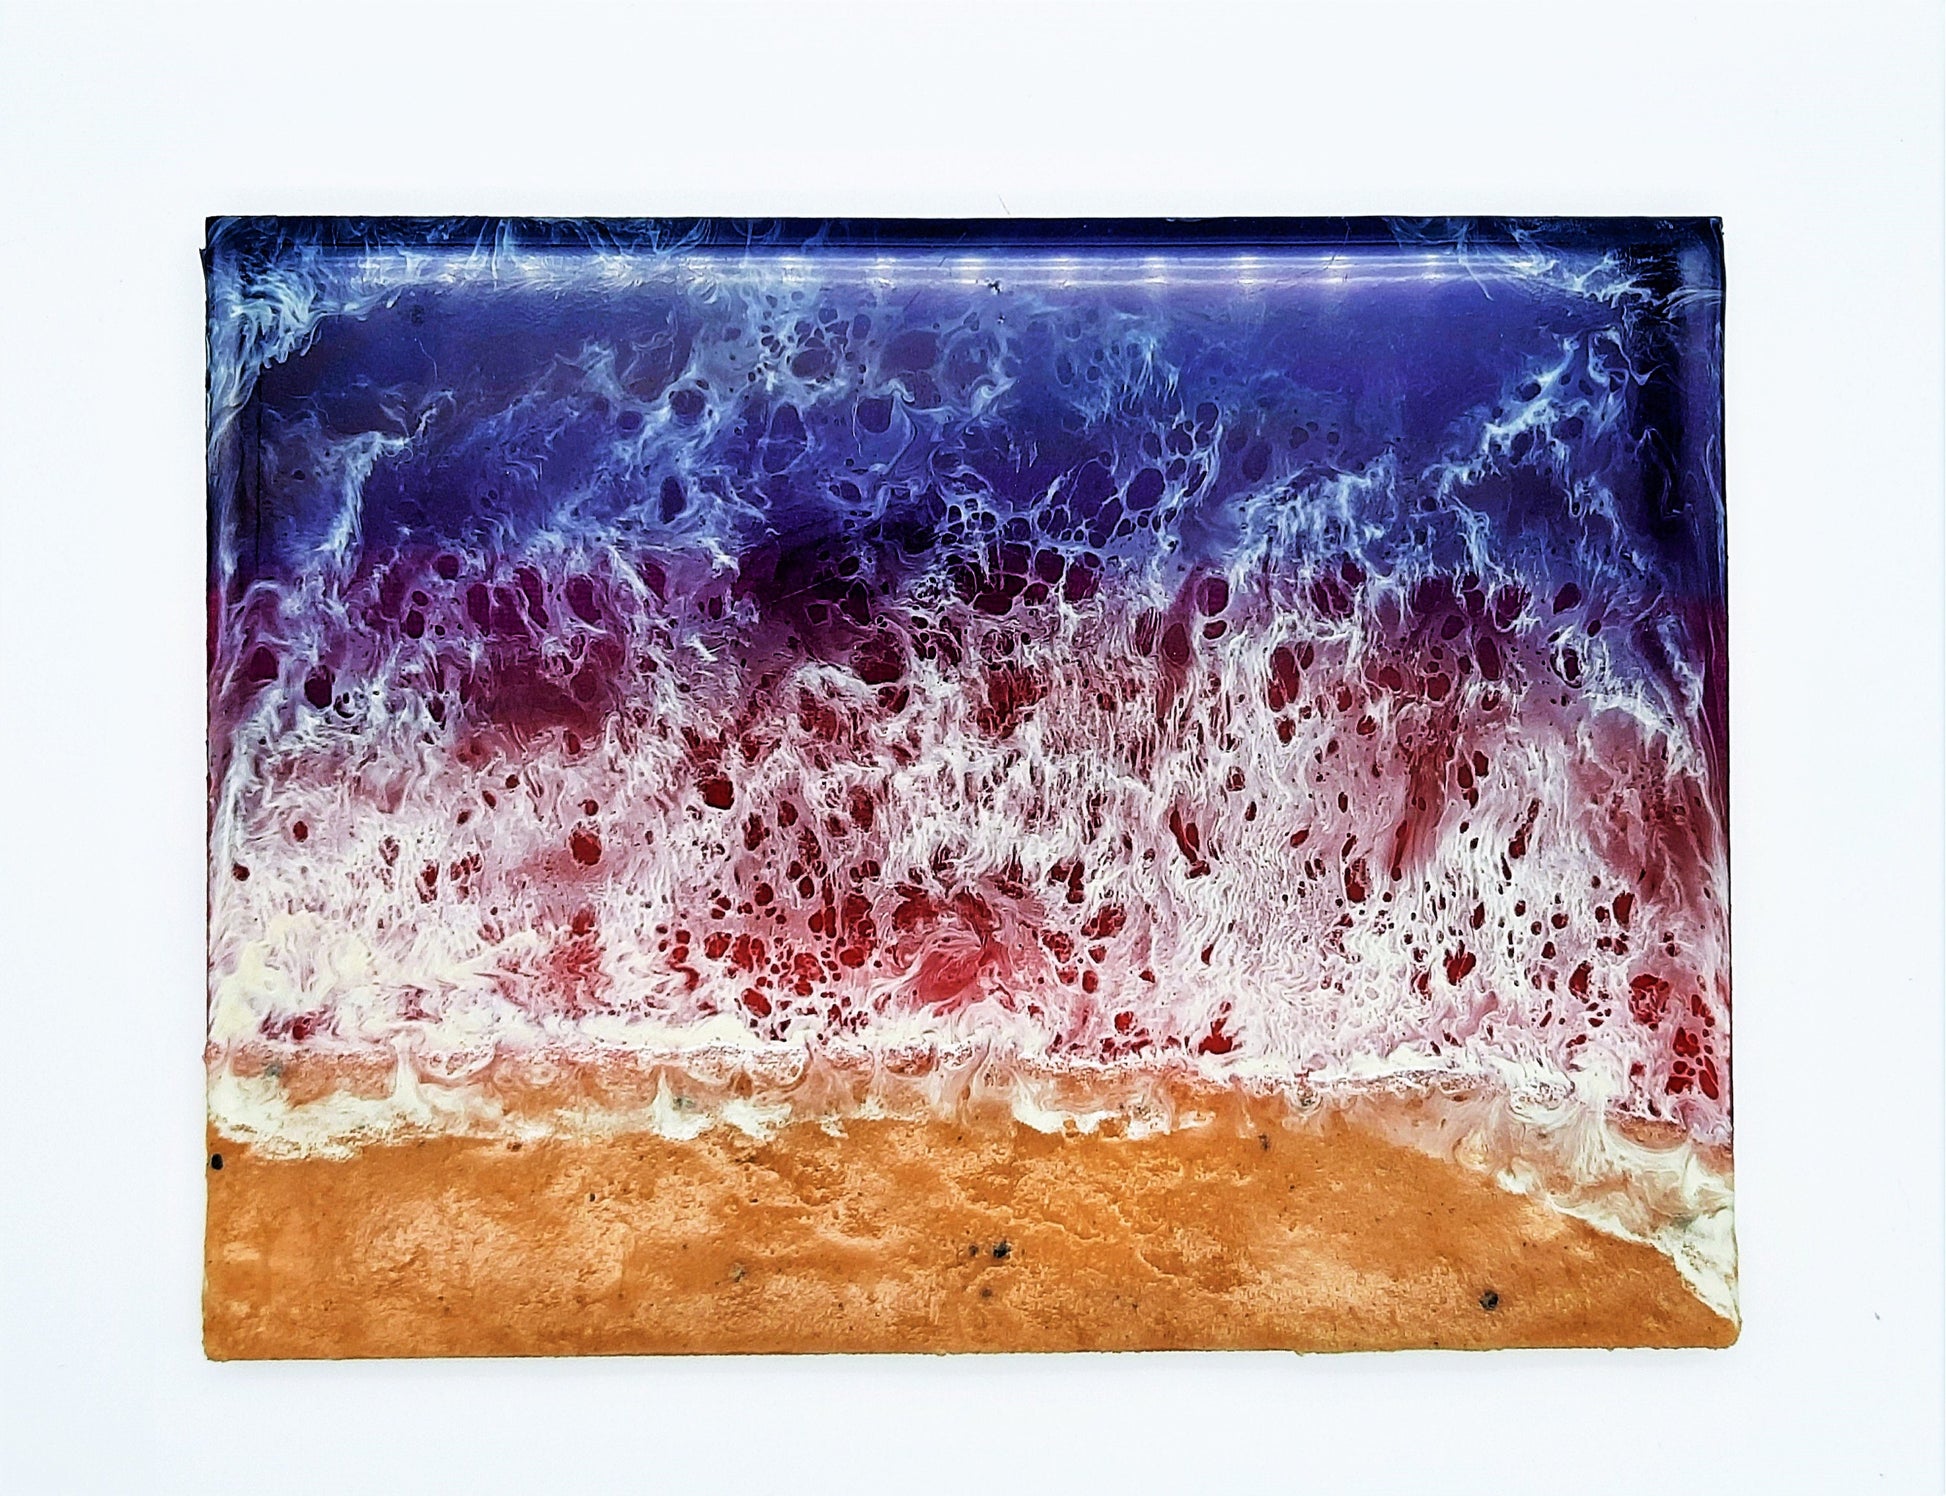 Handpainted Eco-Friendly Resin Seascape Coastal Beach Scene, Dark Purples & Pinks, Made w/ Sand, Mica Sparkle to it, Painted on 8" x 6" Wood